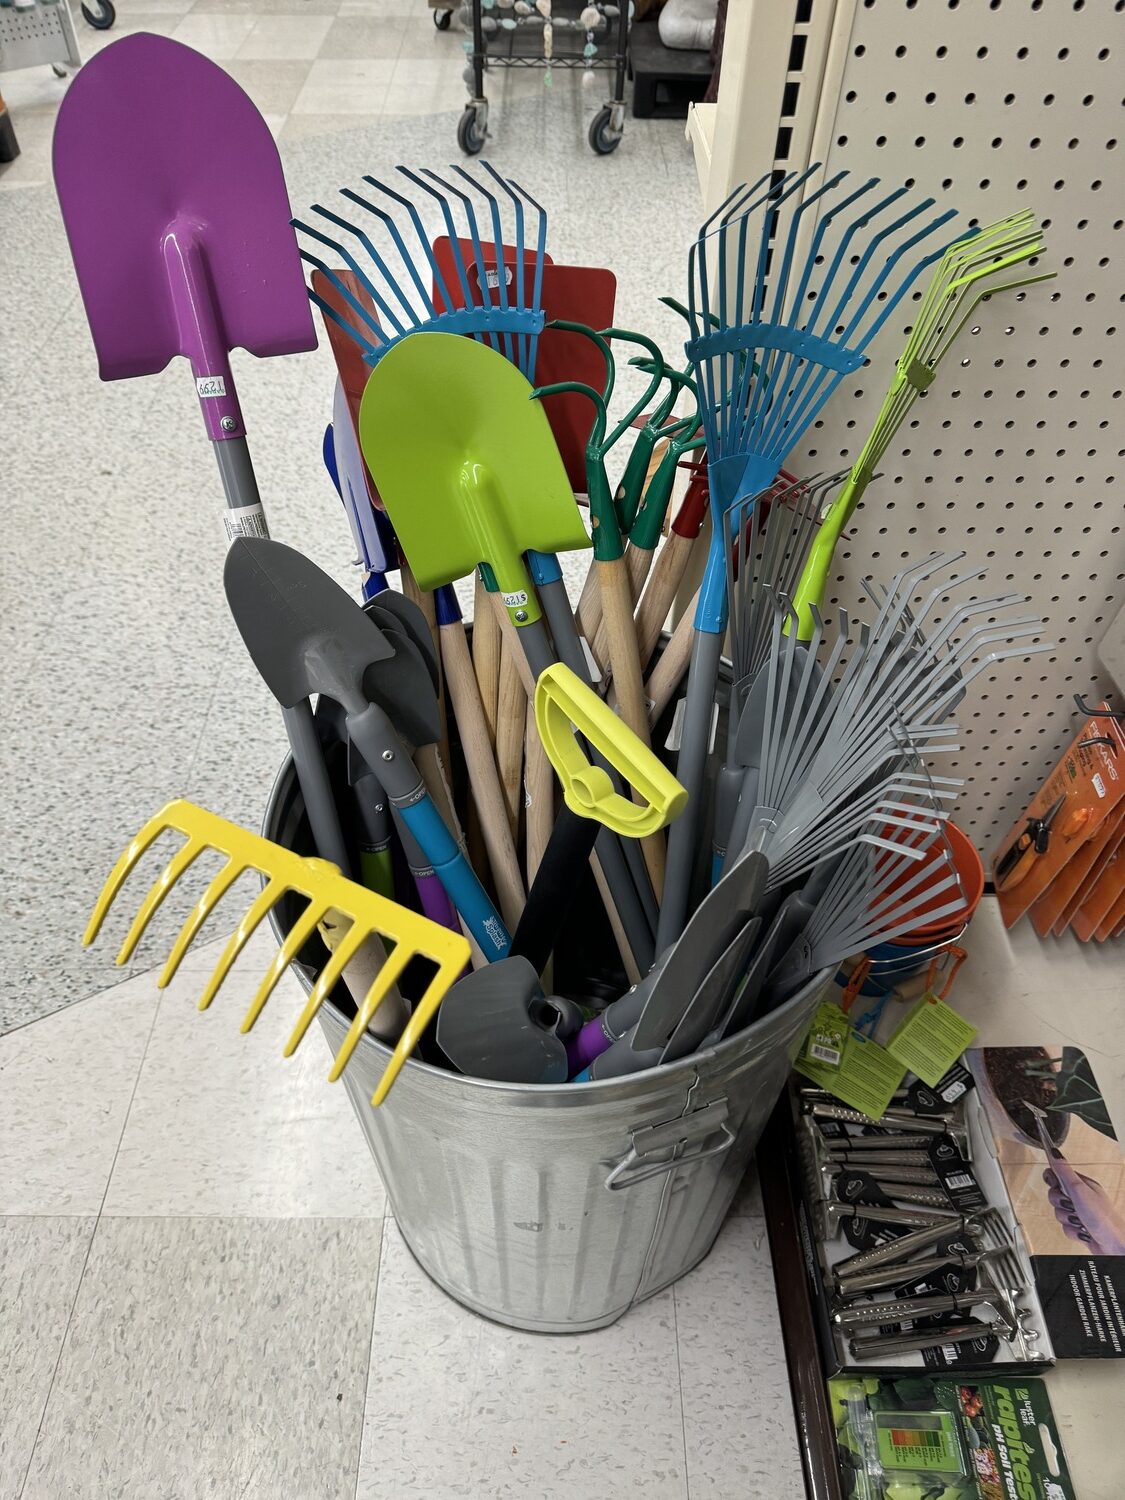 These kids' tools are for the younger children, say 4 to 6 years old, but I’d never give a young child a rake like the yellow one or a tine cultivator (green right of center) unless you are directly supervising and watching.
ANDREW MESSINGER